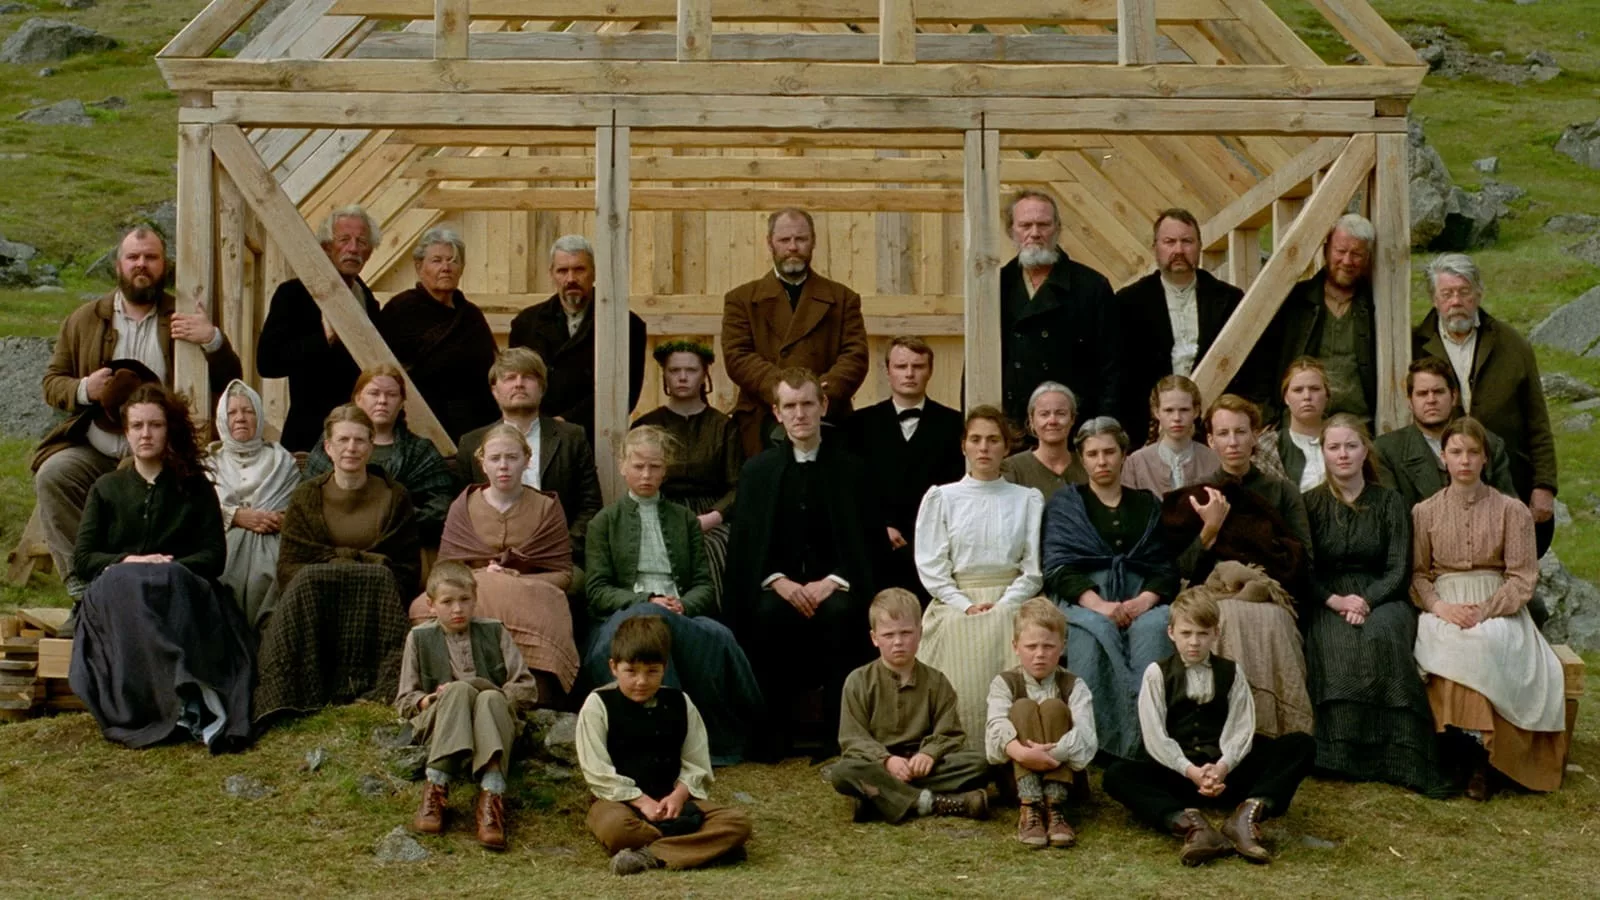 A large group of men, women & children, all dressed in early 20th century garb pose for a picture in front of the frame of a building under construction